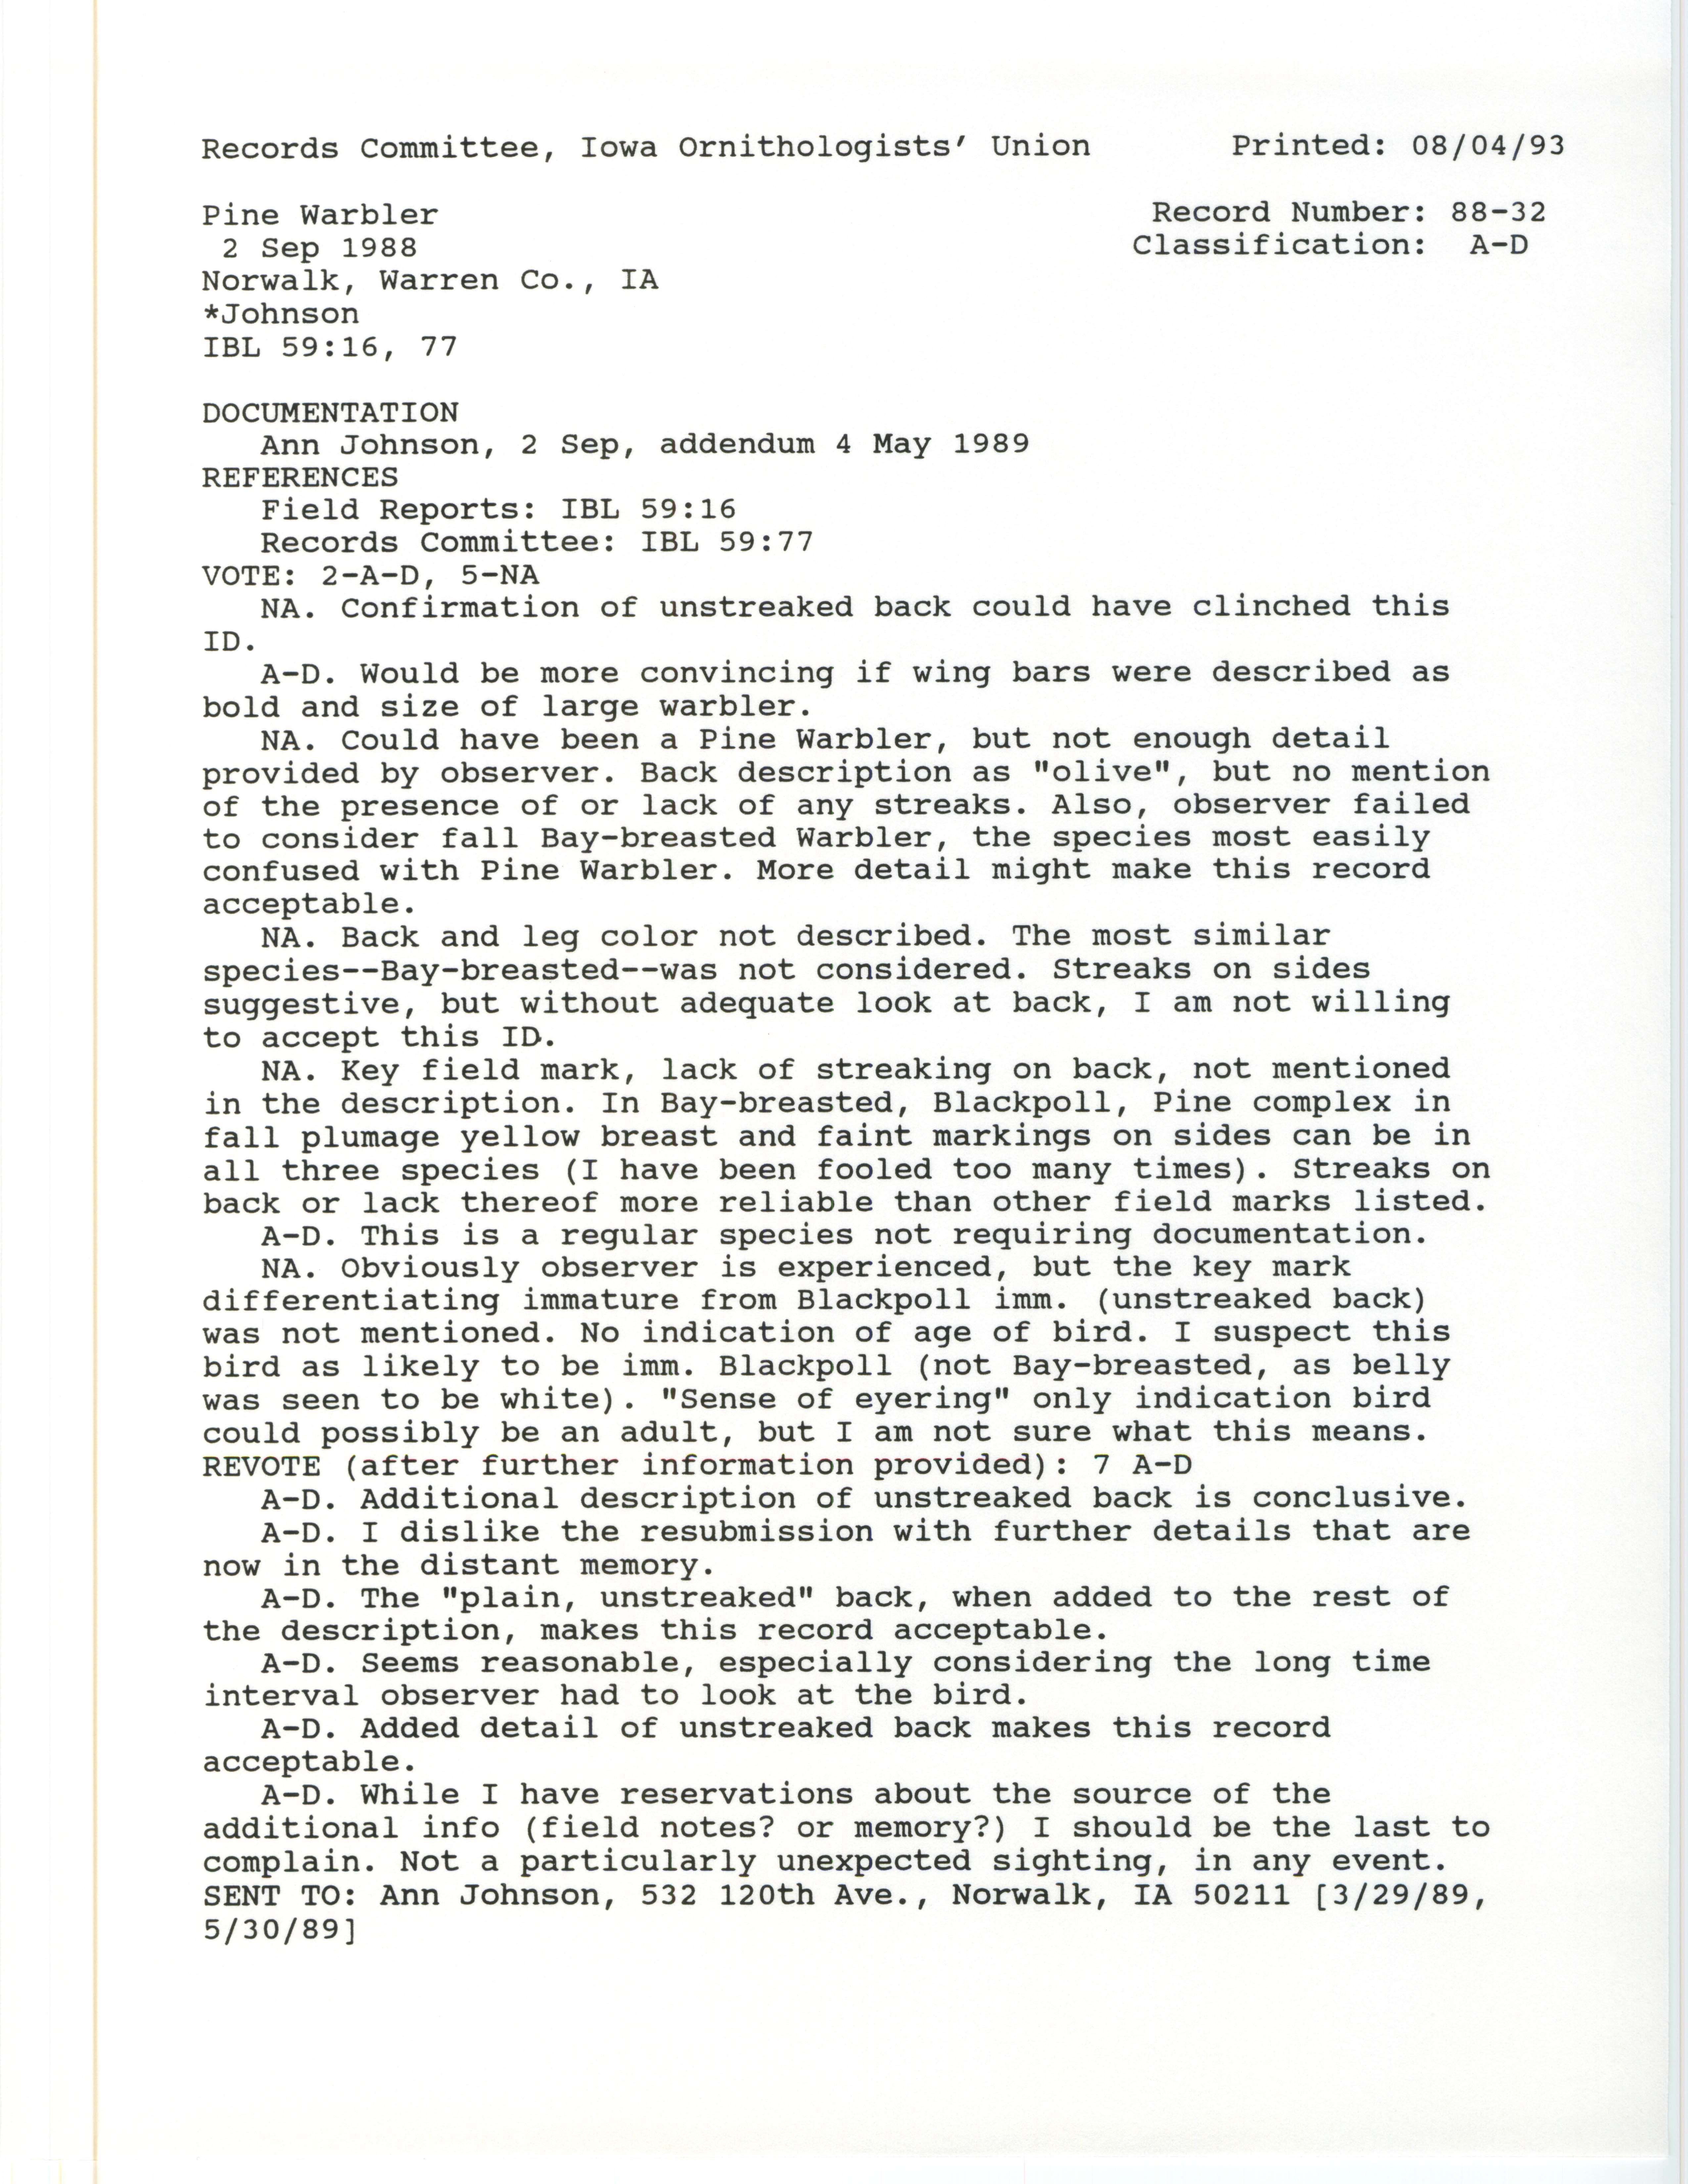 Records Committee review for rare bird sighting for Pine Warbler at Greenfield Township in Warren County, 1988